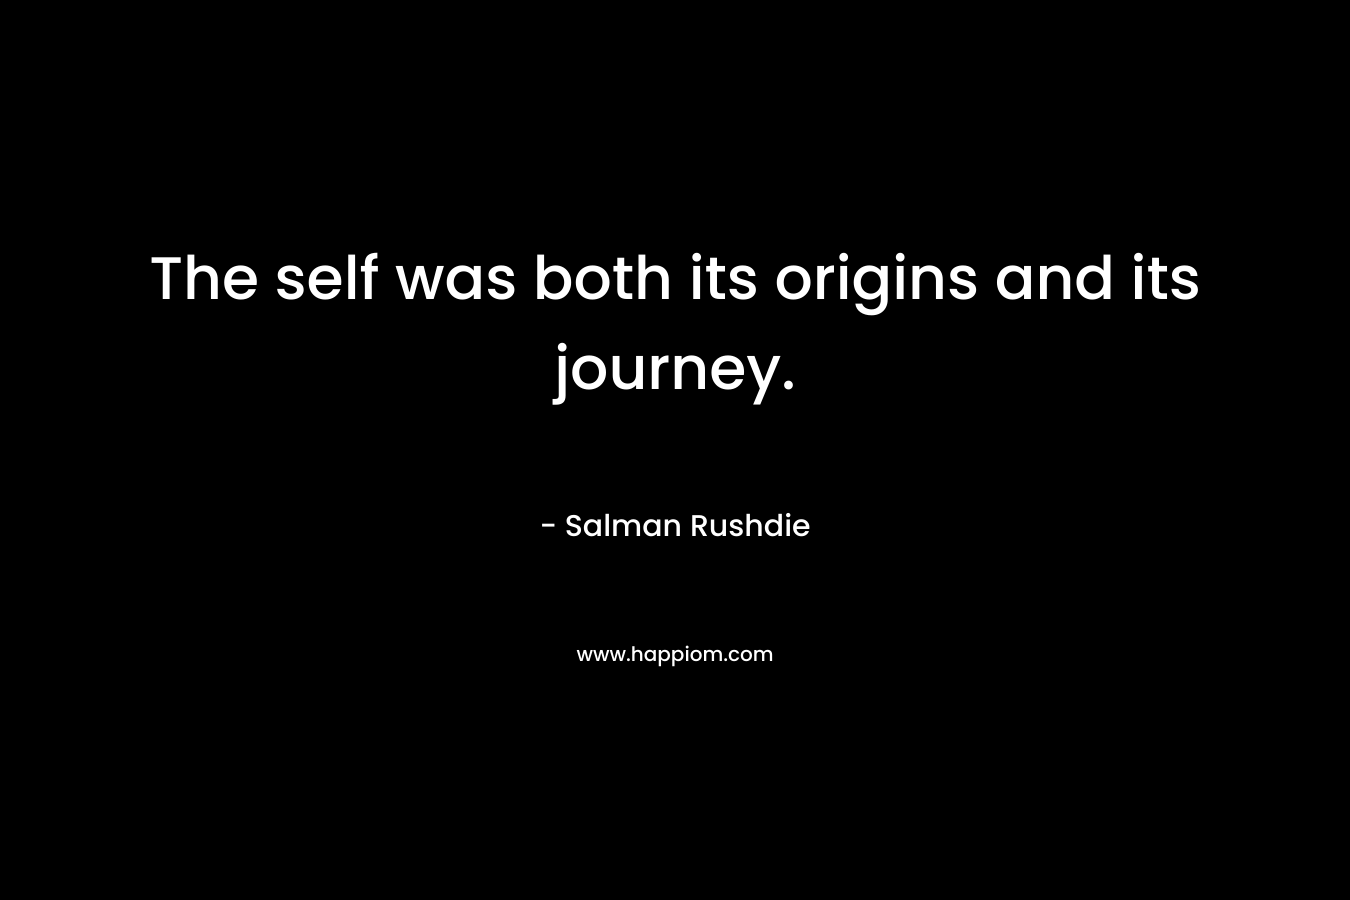 The self was both its origins and its journey.